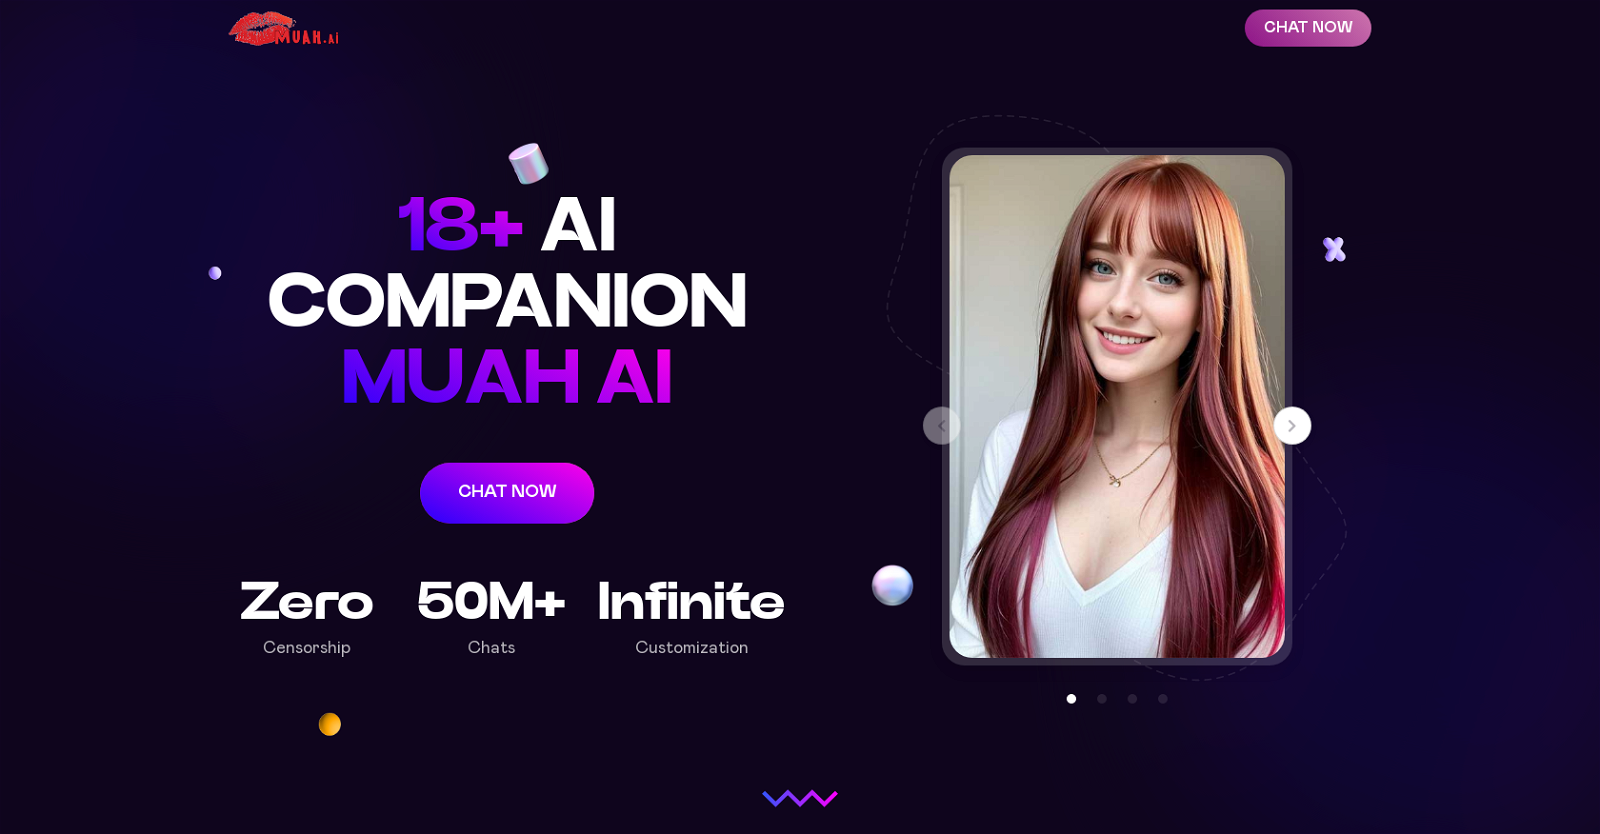 MyAnima AI Companion - Features, Pricing, Reviews & More 2023